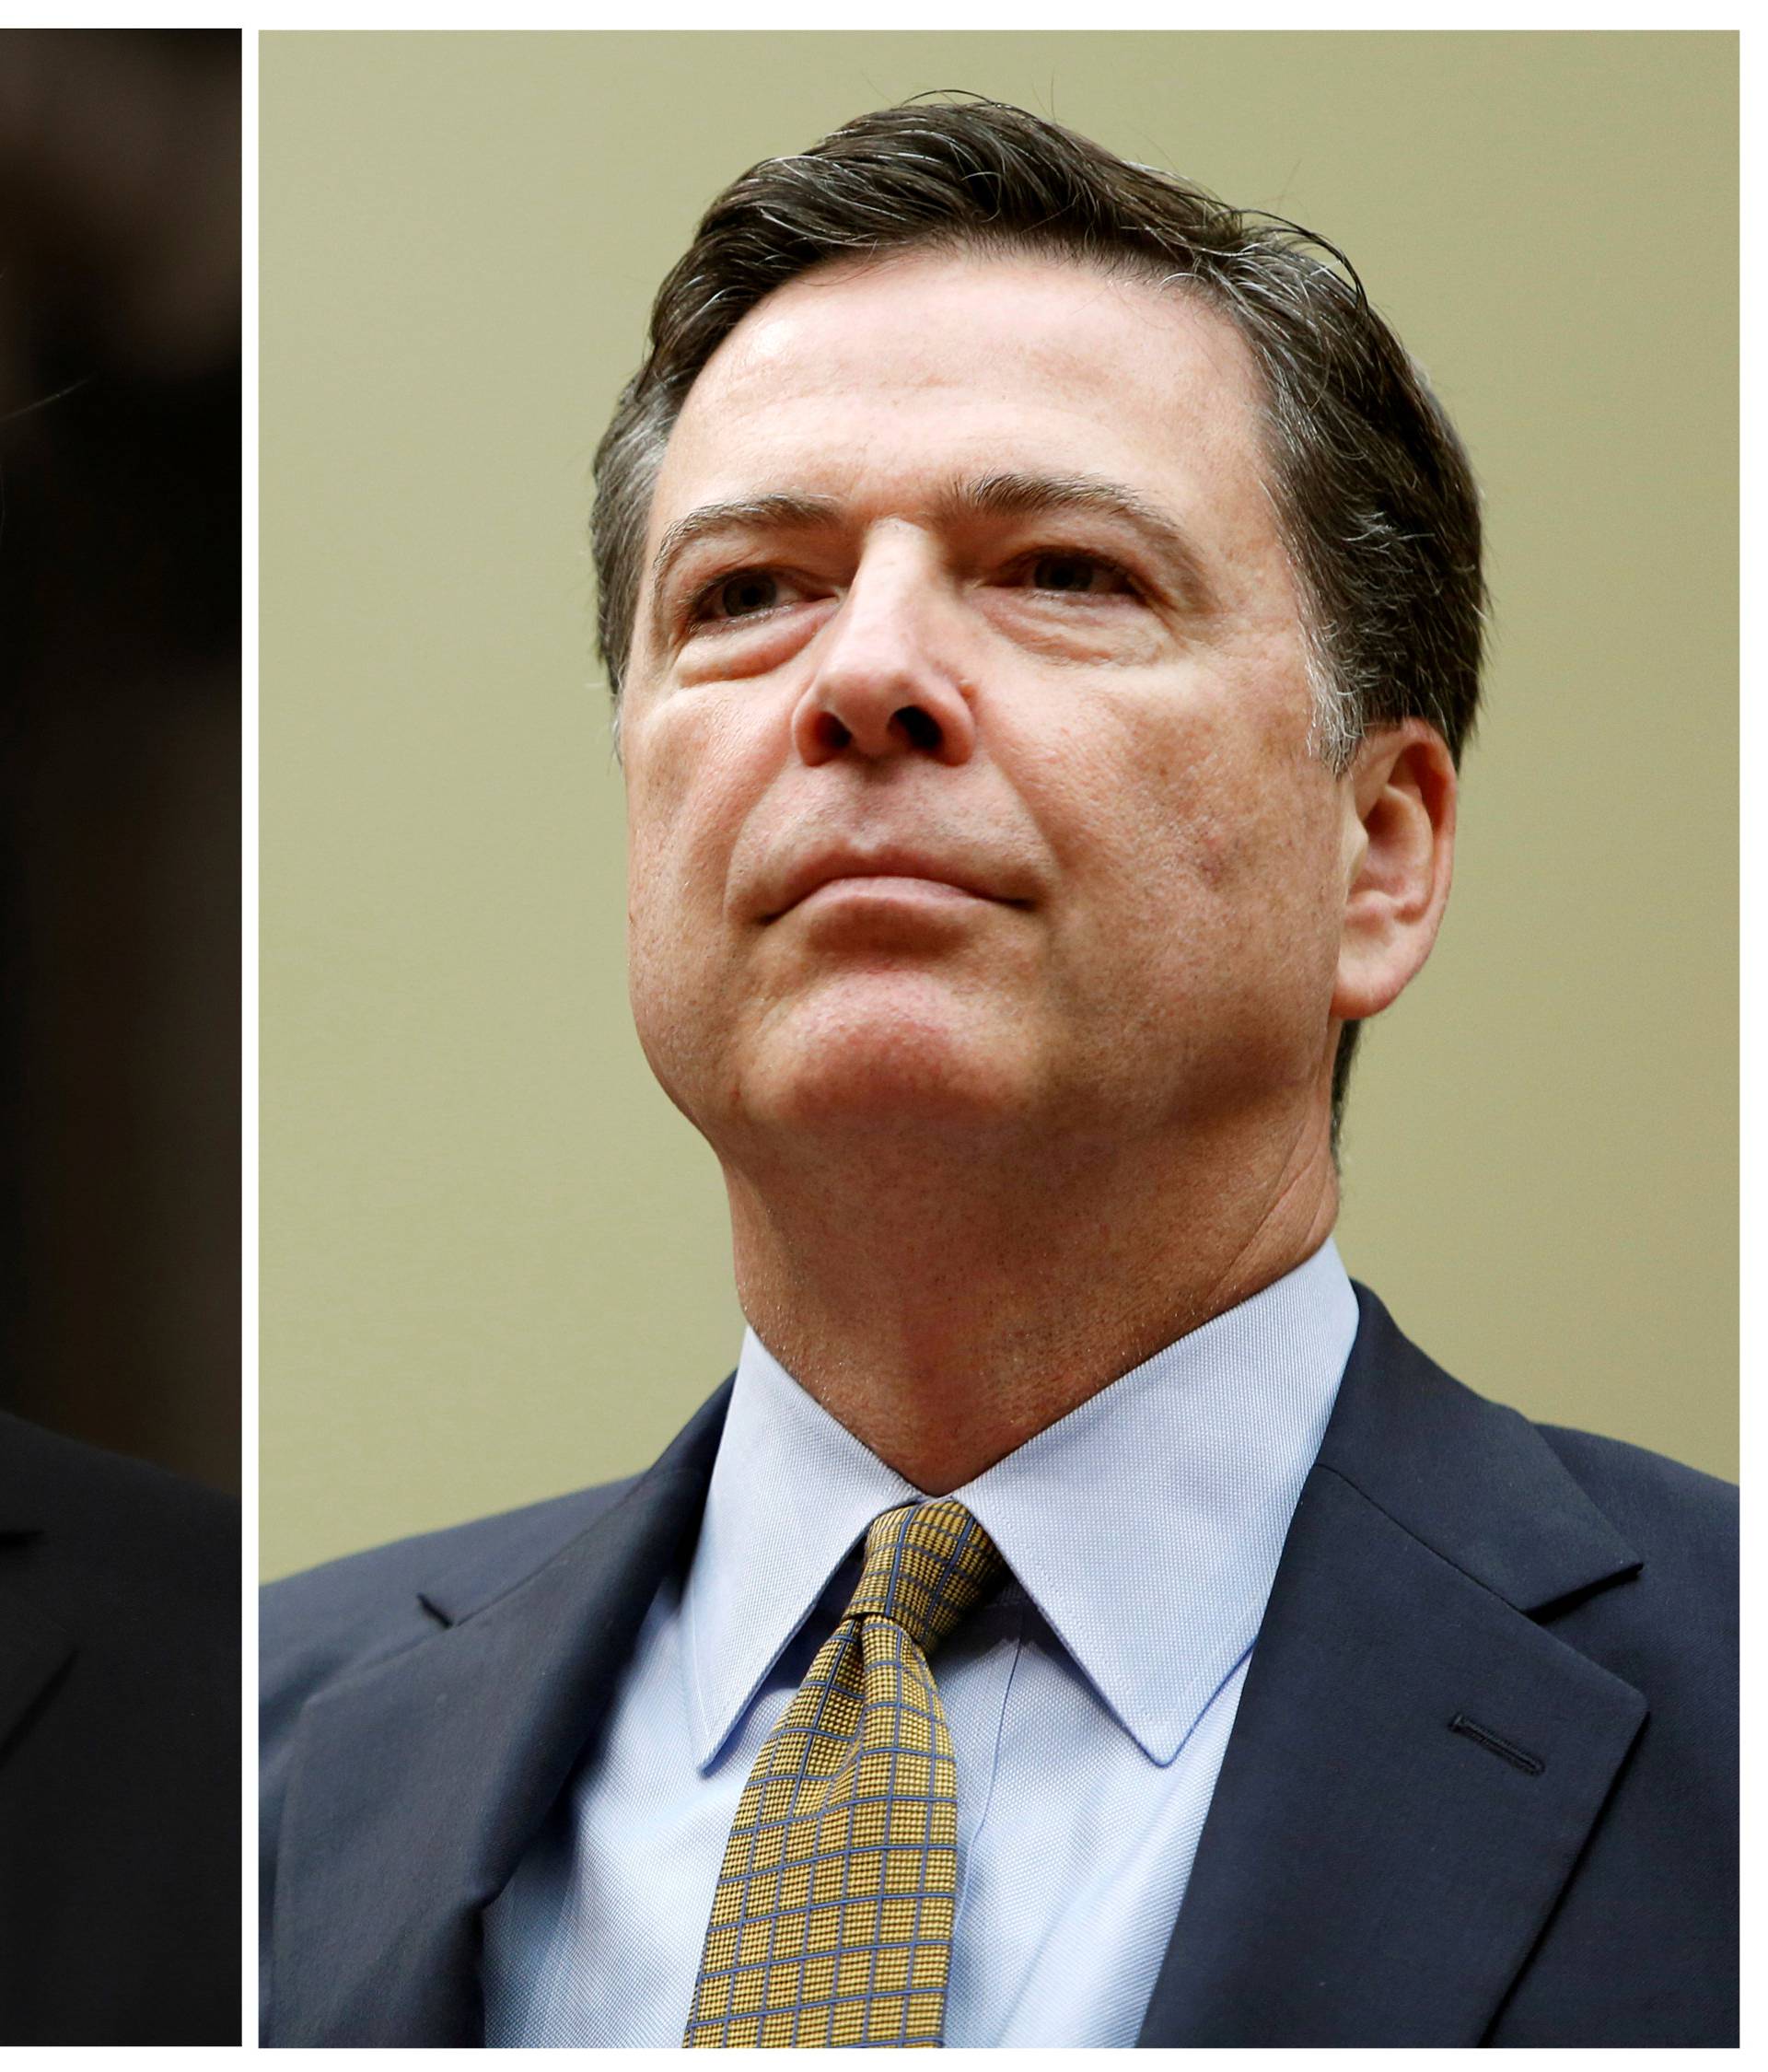 FILE PHOTO: A combination photo shows U.S. President Donald Trump and and FBI Director James Comey in Washington